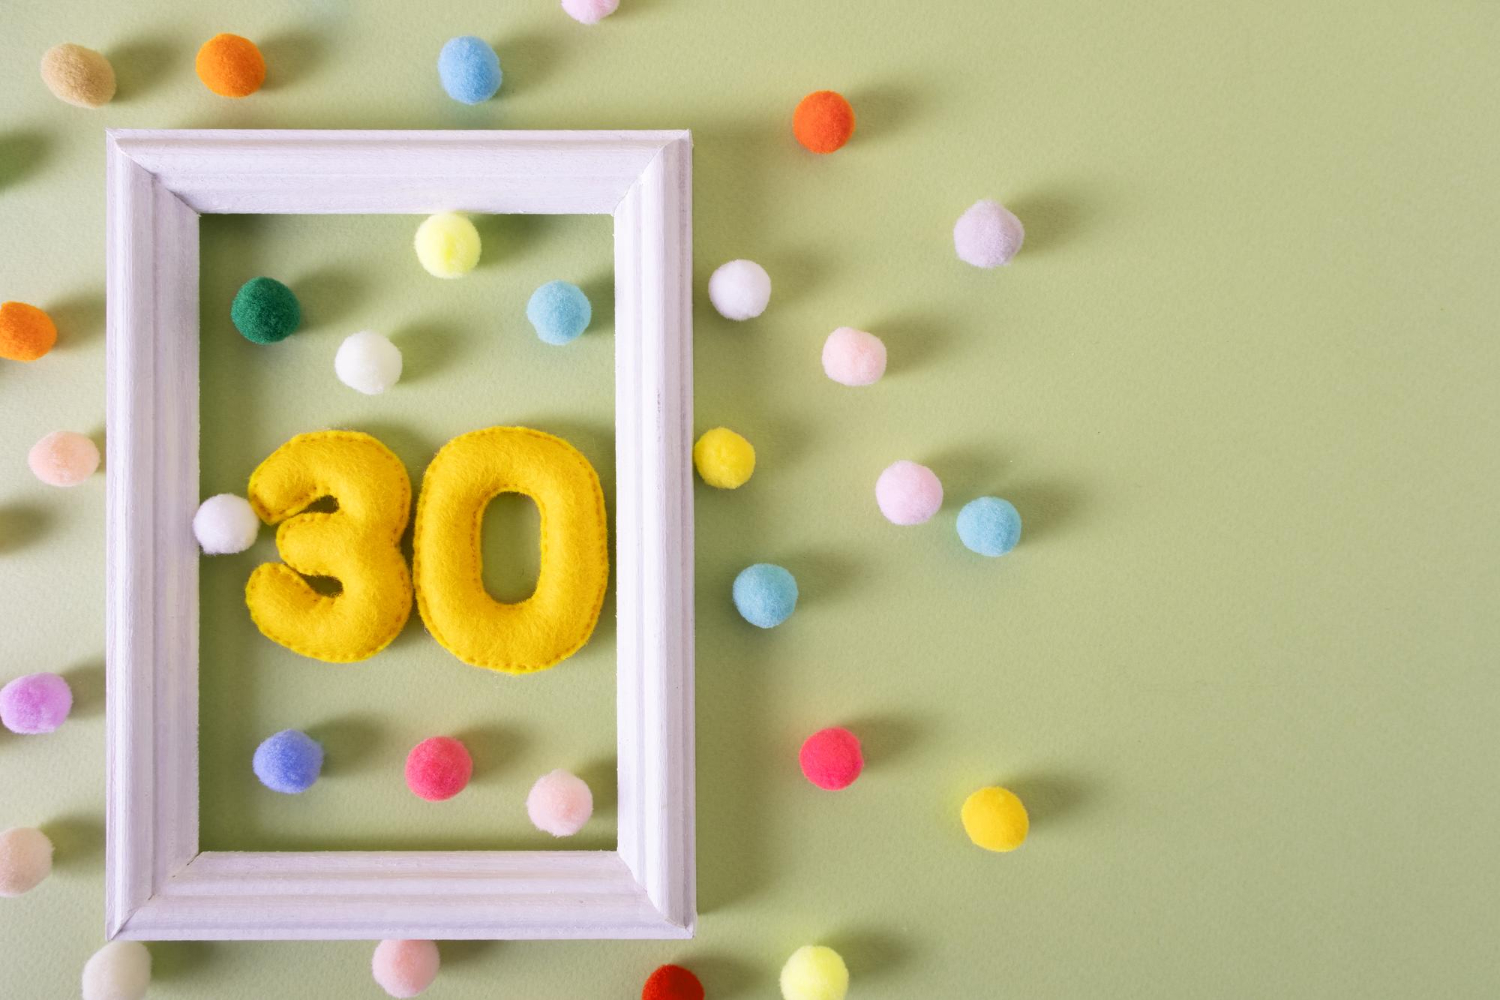 30th Birthday Quotes for Self-Reflection